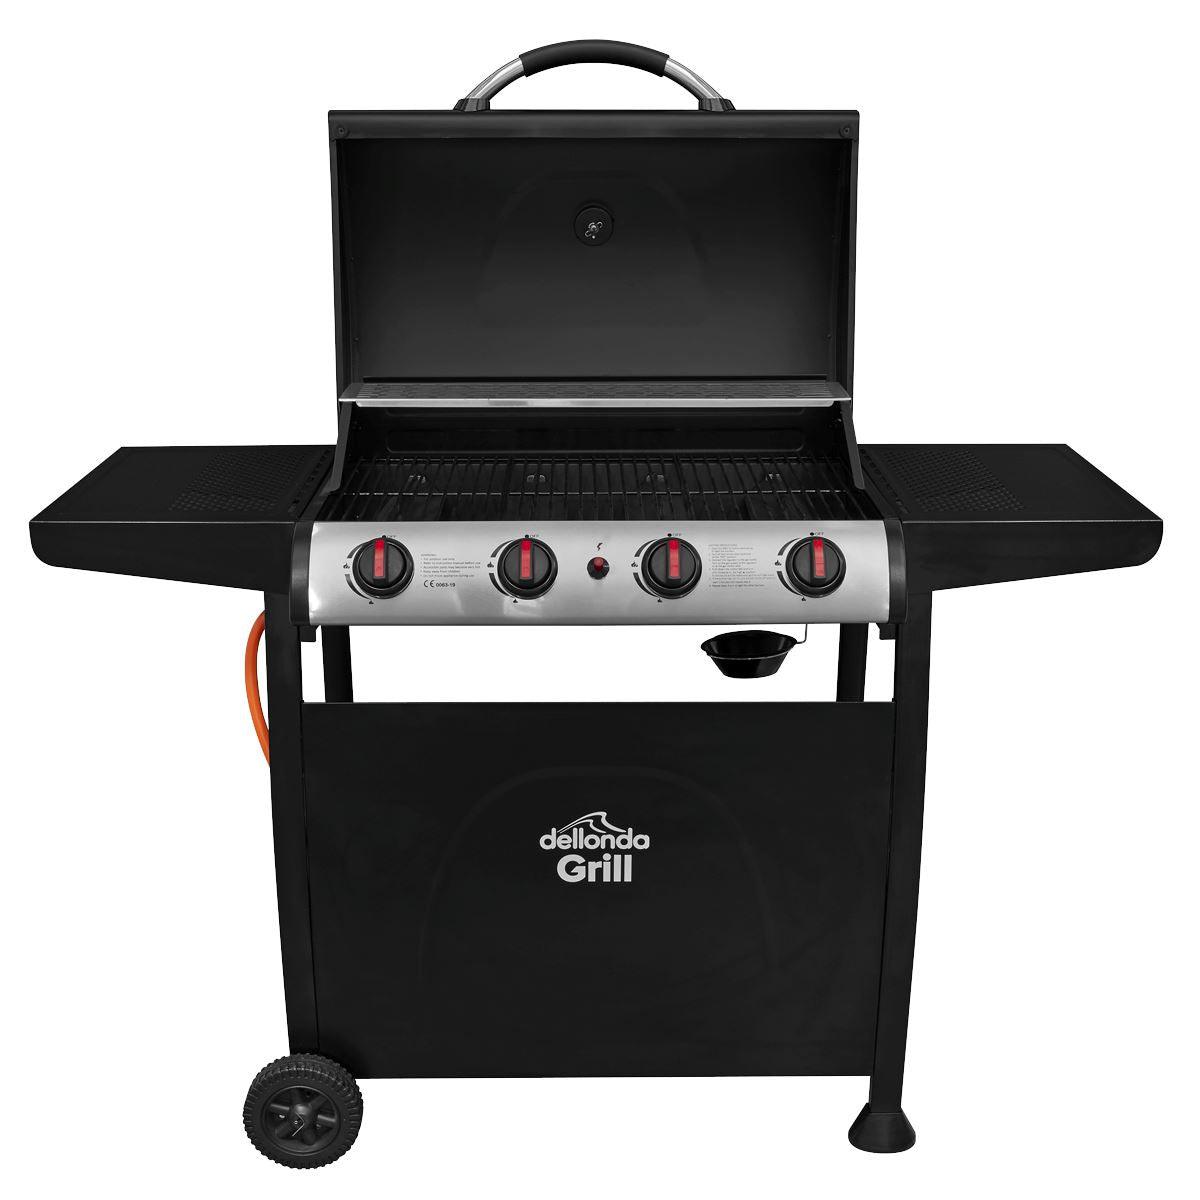 Dellonda 4 Burner Gas BBQ Grill, Ignition, Thermometer, Black/Stainless Steel DG15 - Tools 2U Direct SW